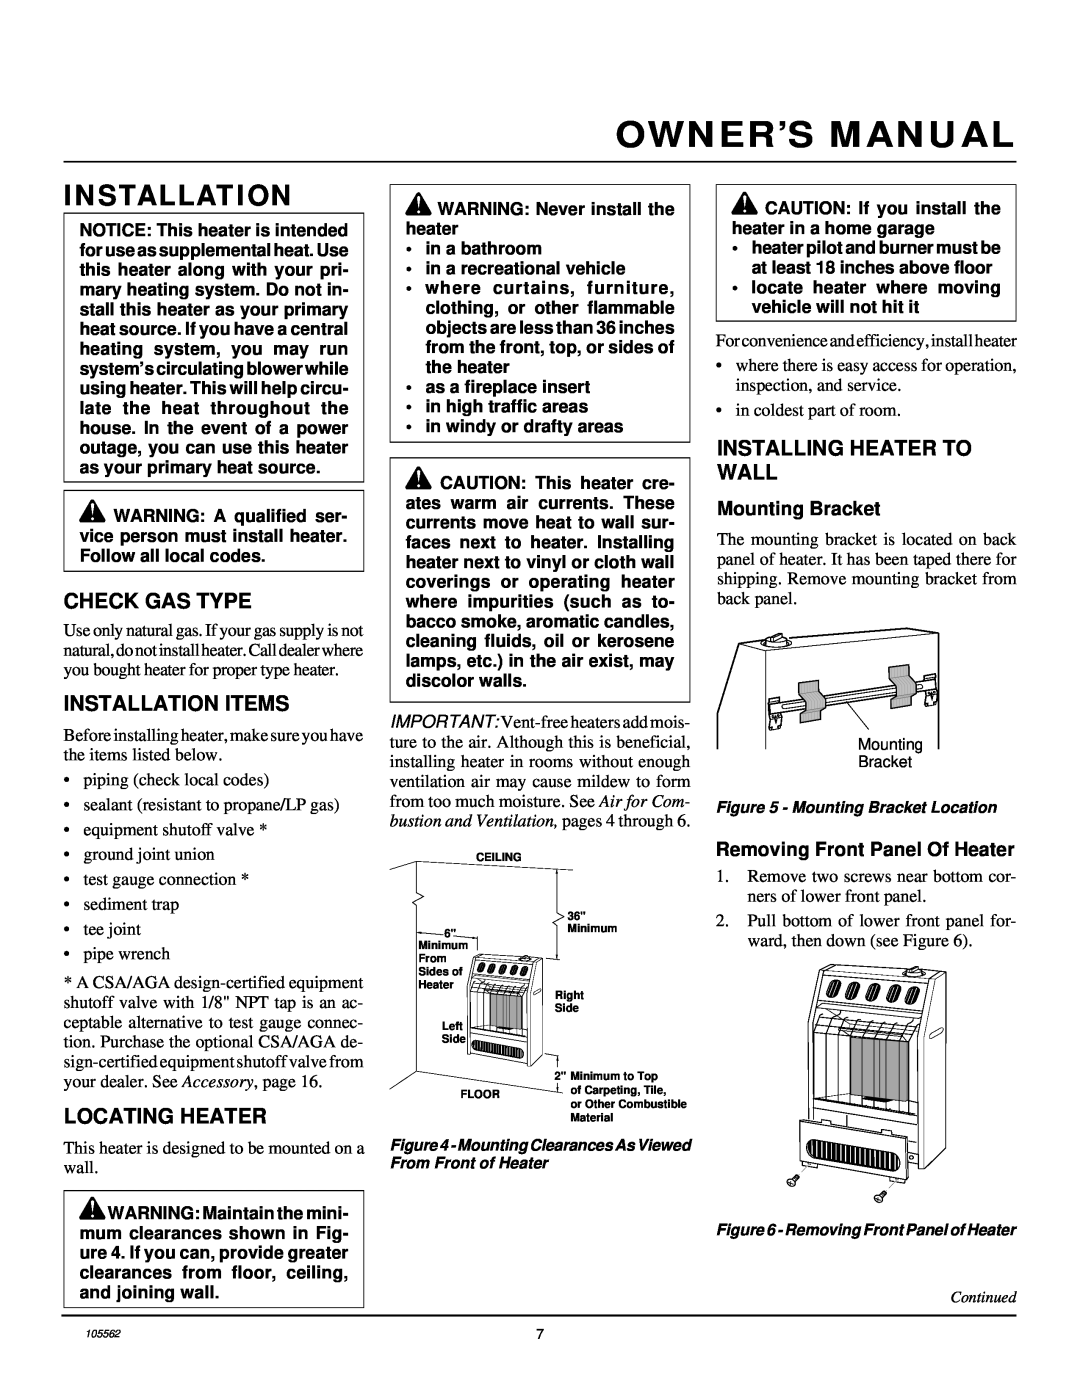 Desa FA-2B Installation, Owner’S Manual, WARNING Never install the heater in a bathroom, in a recreational vehicle 